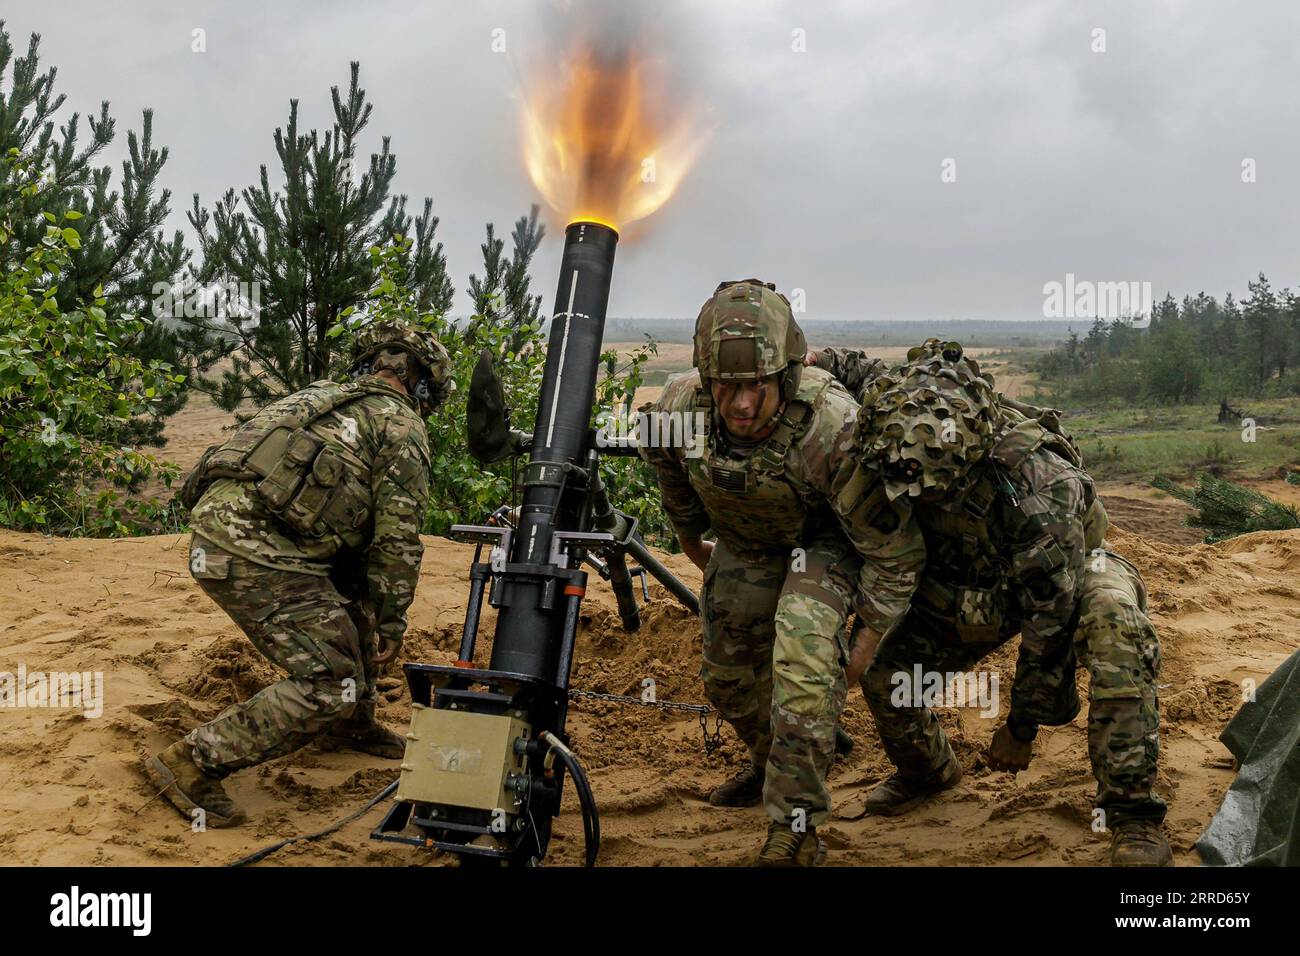 Camp Adazi, Latvia. 28th Aug, 2023. U.S. Army mortarmen assigned to 1st Battalion, 506th Infantry Regiment Red Currahee 1st Infantry Brigade Combat Team, 101st Airborne Division (Air Assault), supporting 4th Infantry Division, fire an M120A1 120 mm towed mortar system during a fire support coordination exercise at Camp Adazi, Latvia, Aug. 28. The 4th Inf. Div.'s mission in Europe is to engage in multinational training and exercises across the continent, working alongside NATO allies and regional security partners to provide combat-credible forces to V Corps, Americas forward deployed corps Stock Photo